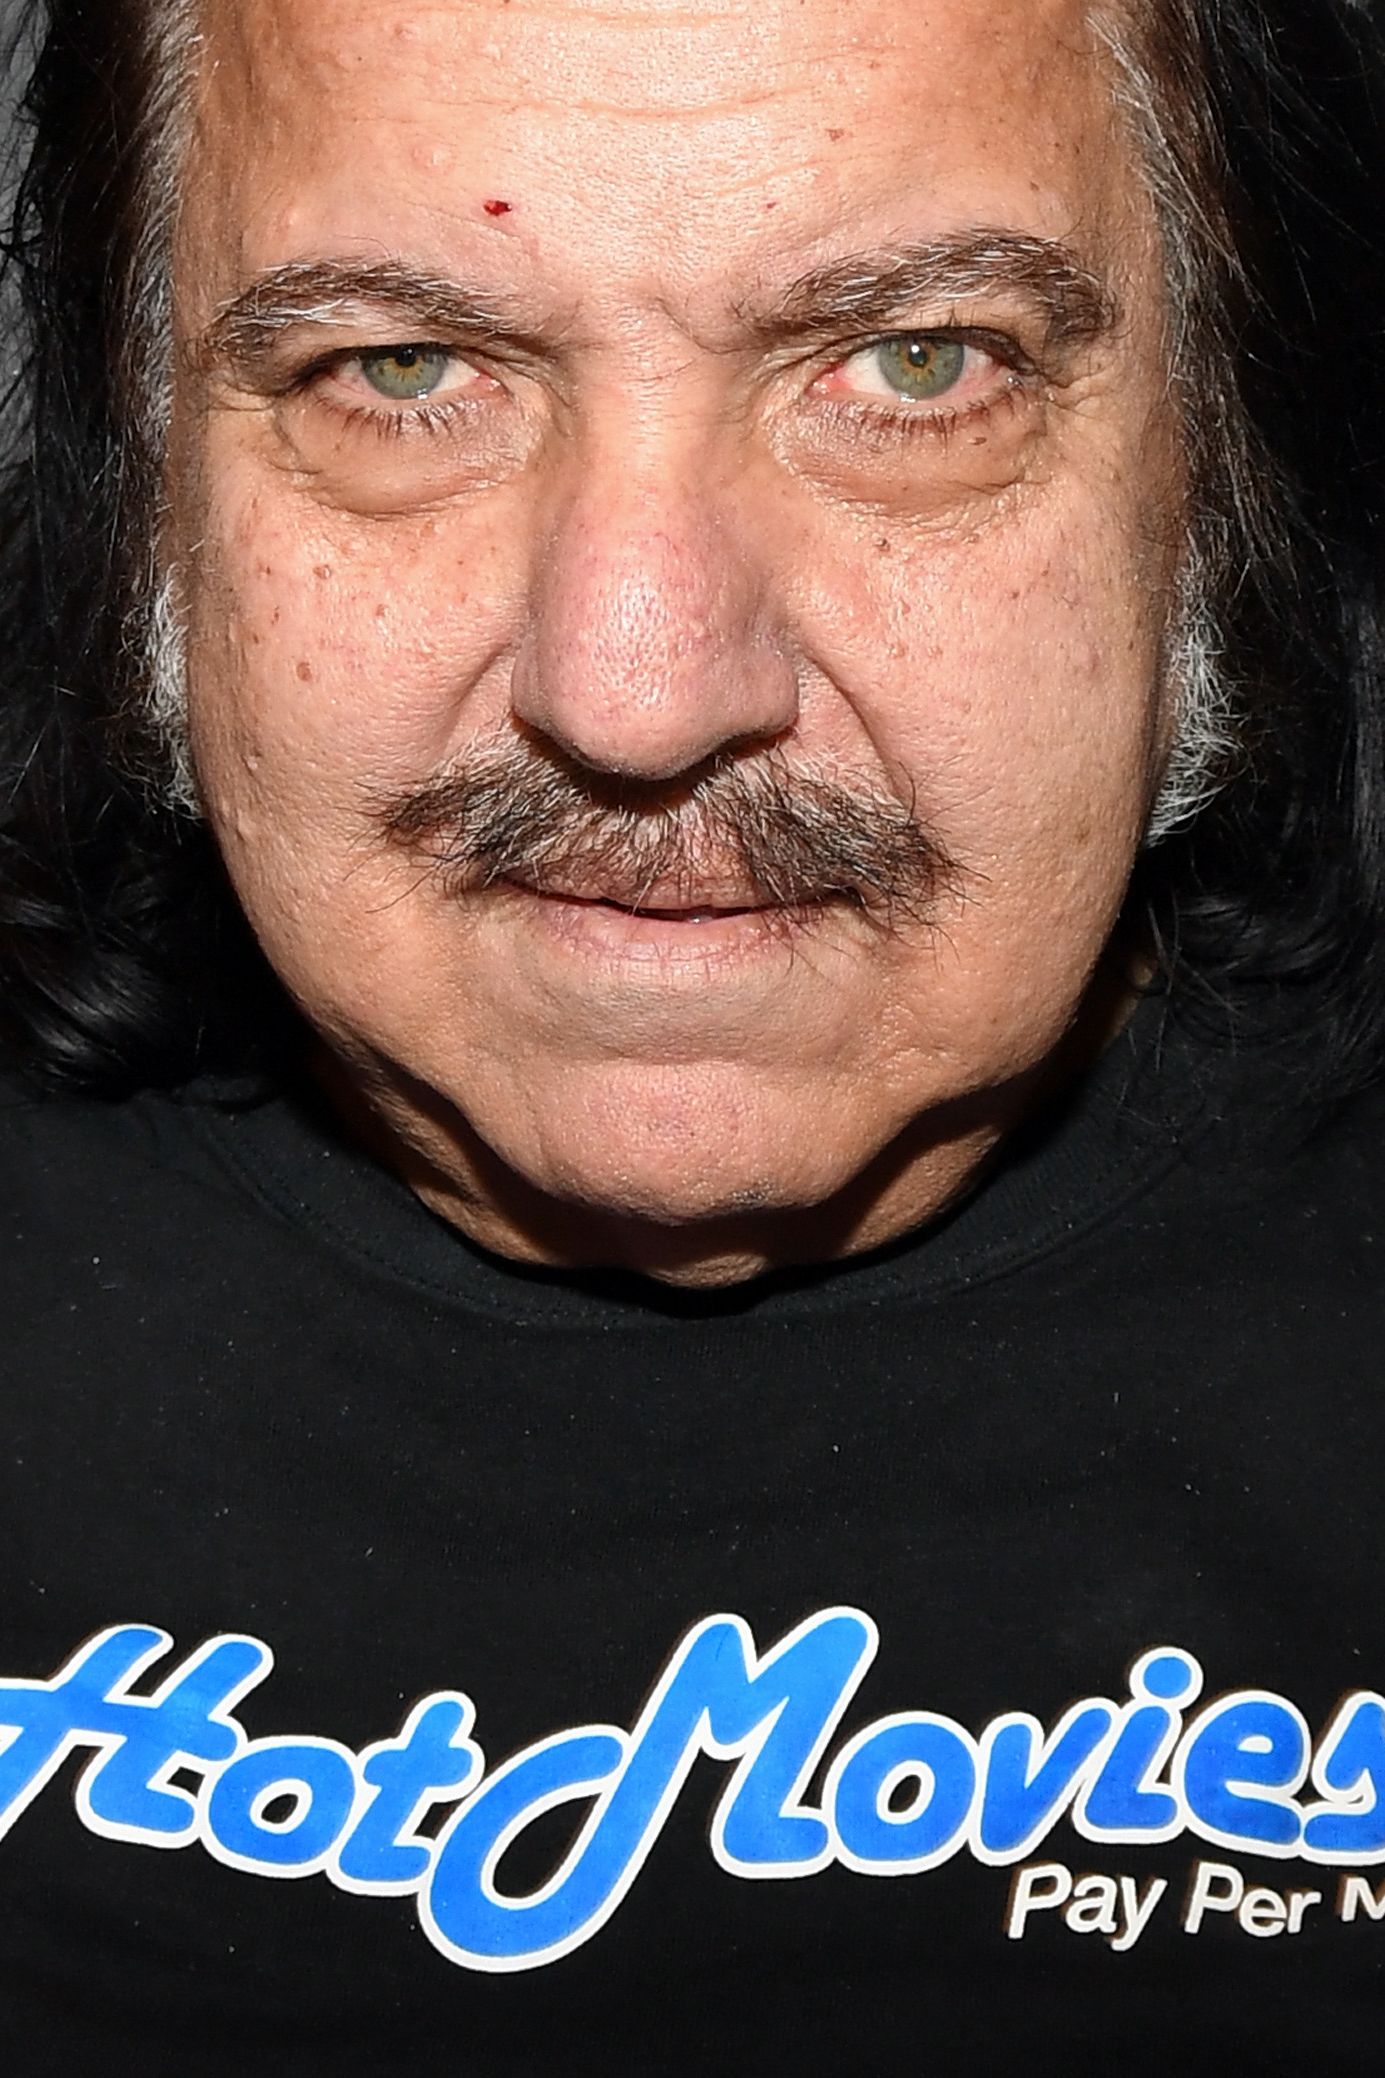 Ww Xxx Indian Rep And Jabrdasti Video - Ron Jeremy, porn star, charged with sexually assaulting four women | CNN